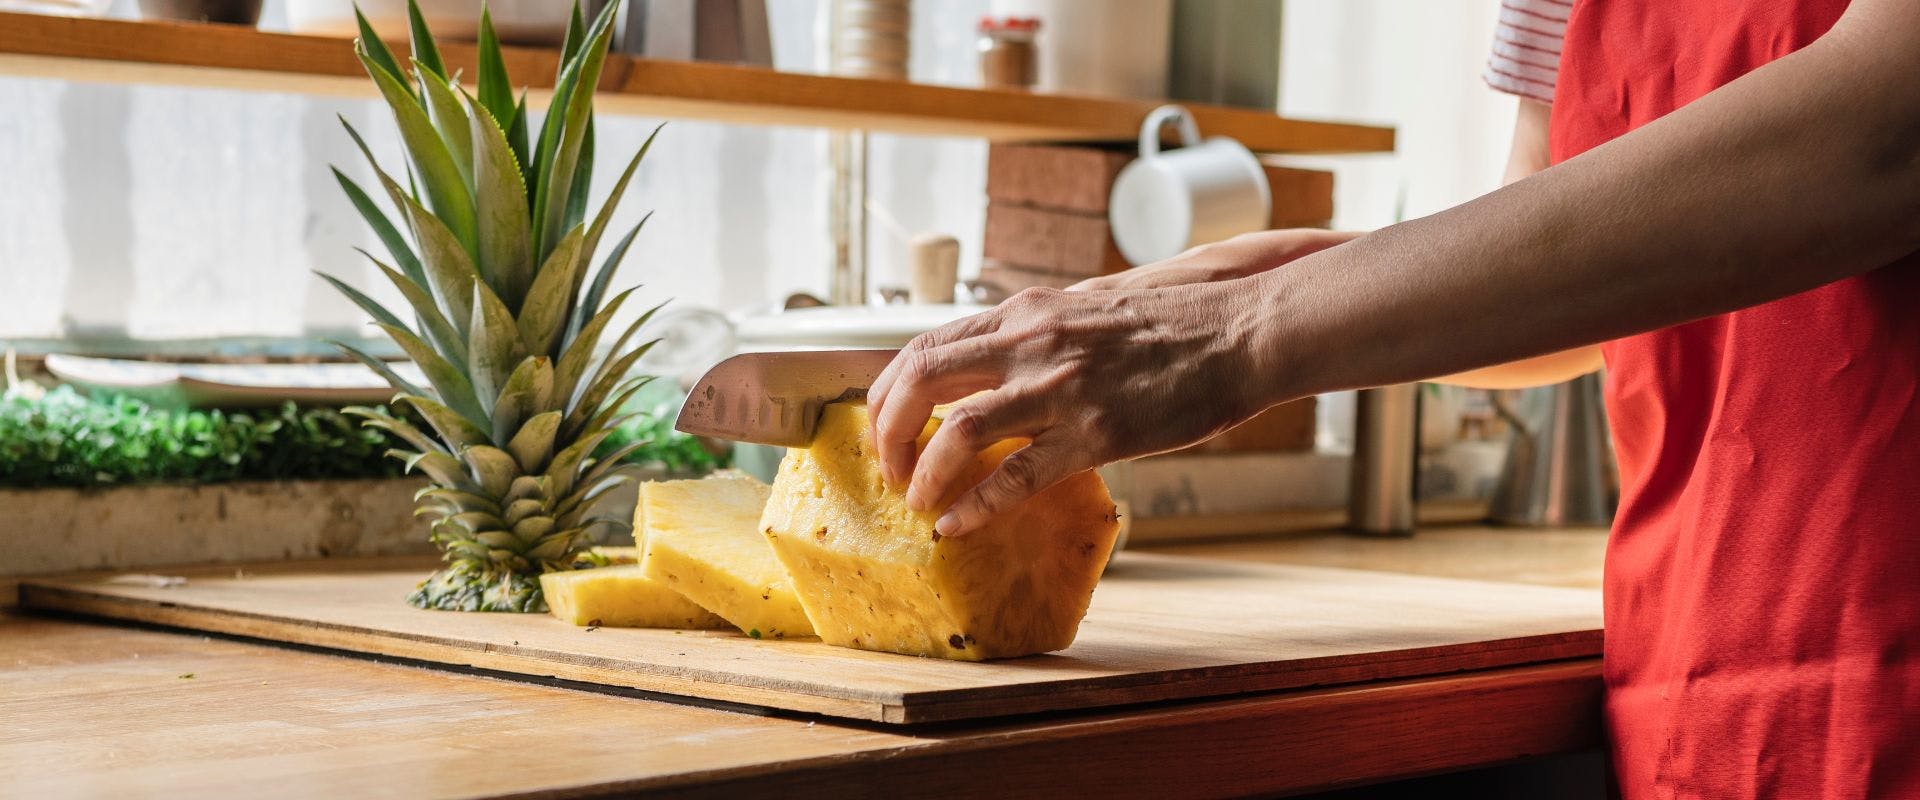 Person slicing a pineapple